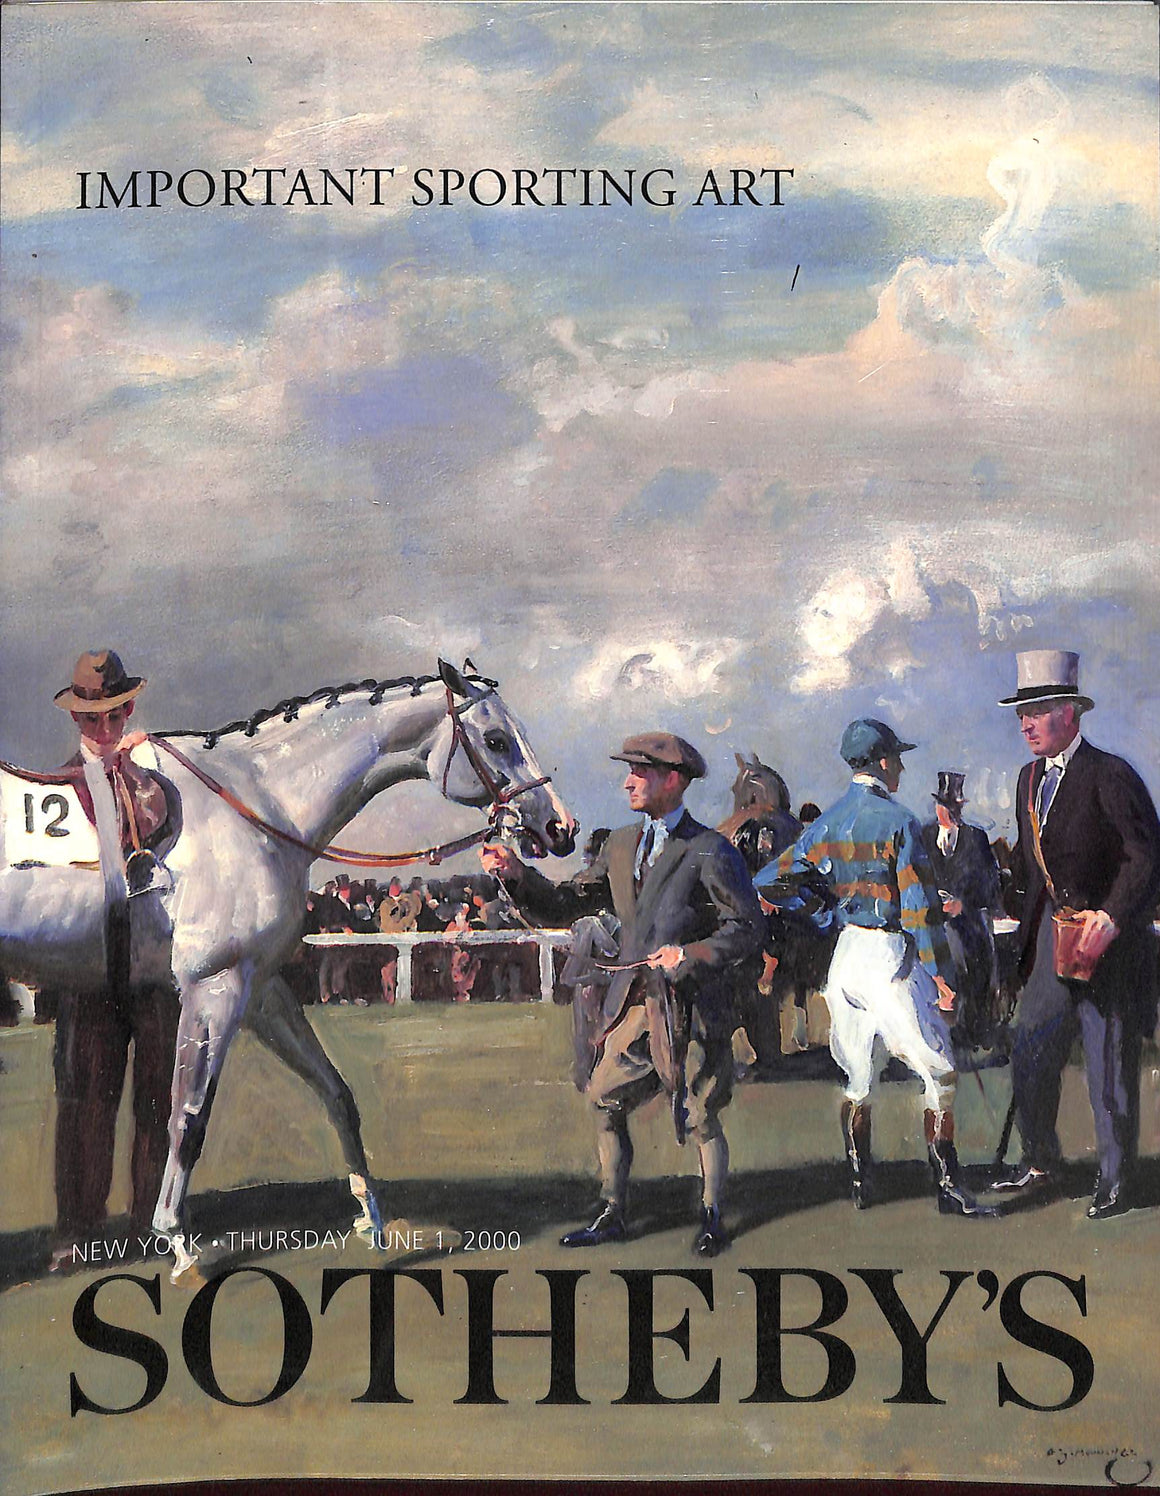 "Important Sporting Art" June 1, 2000 Sotheby's